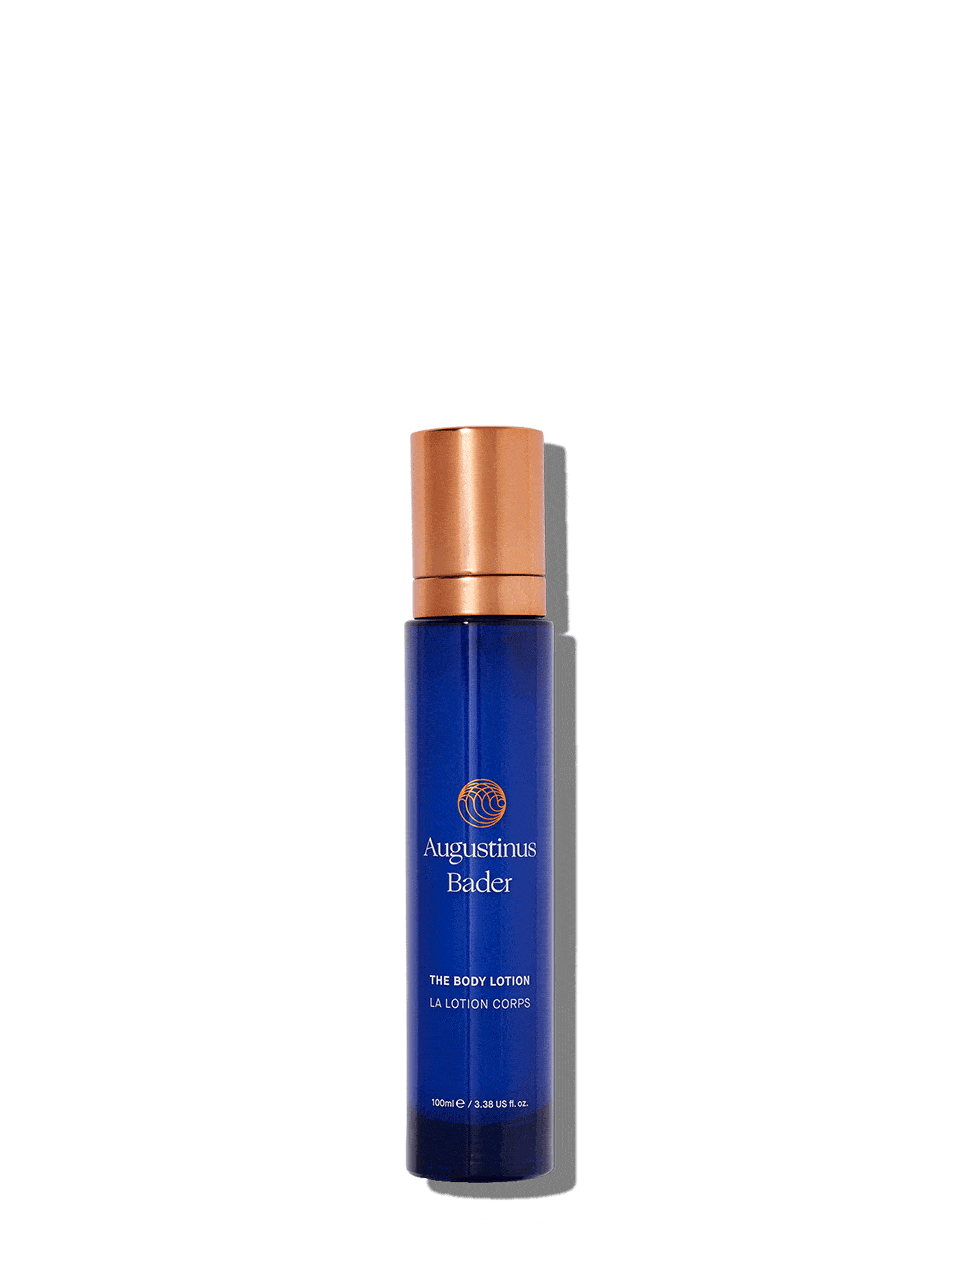 The Body Lotion Body Care Augustinus Bader 